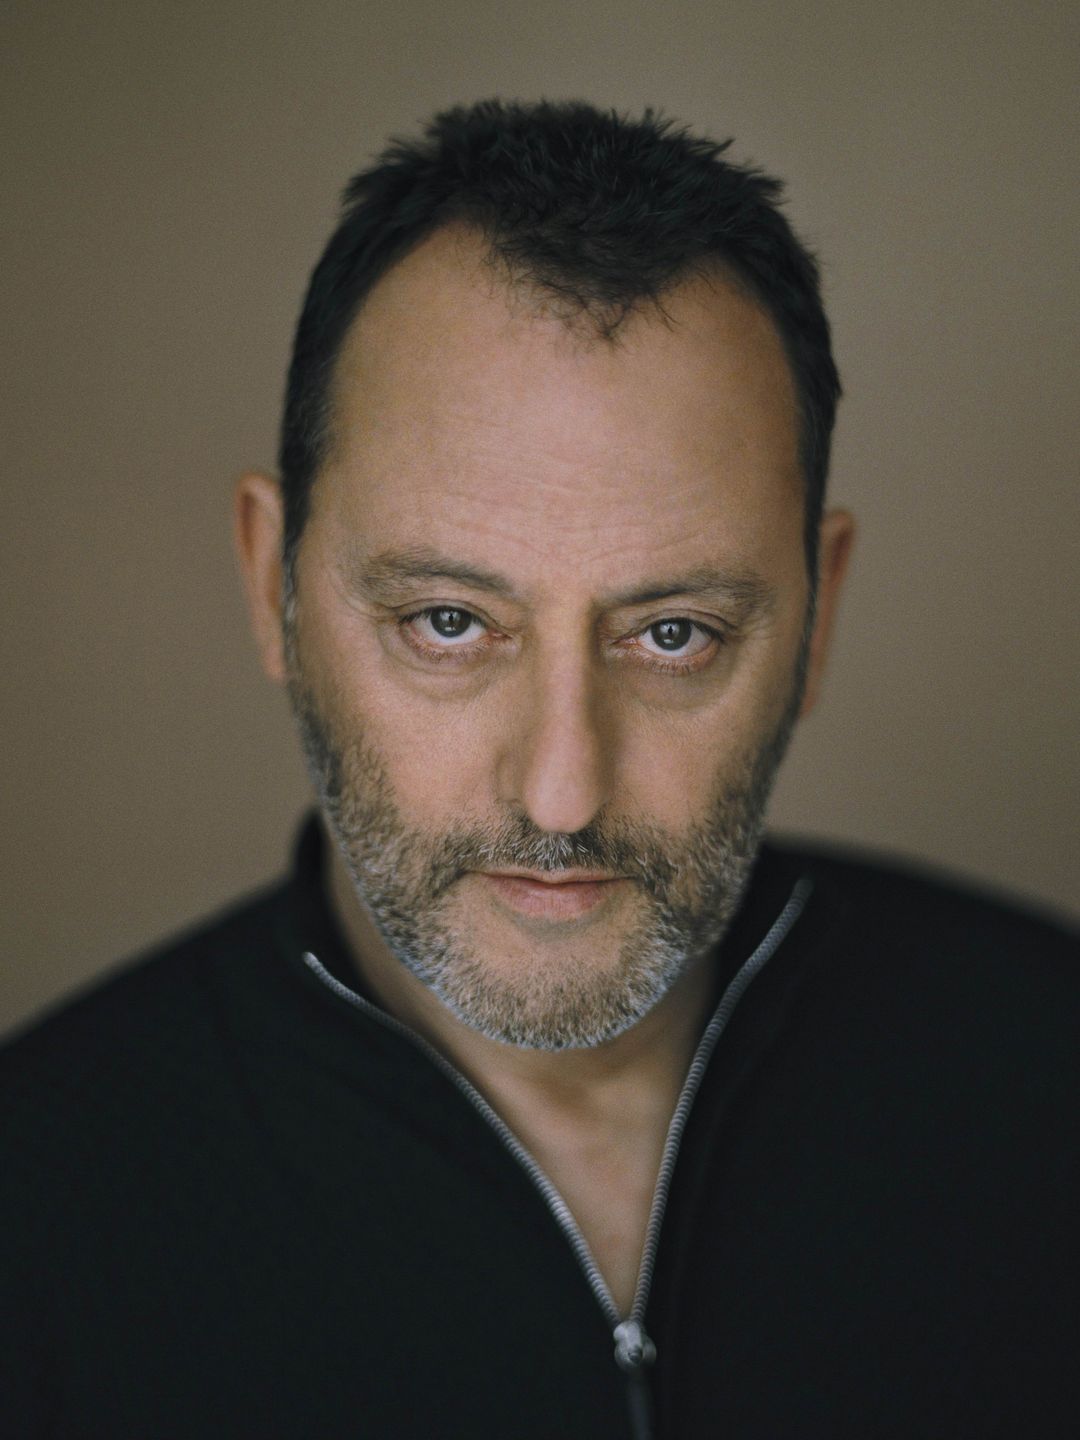 Jean Reno where is he now